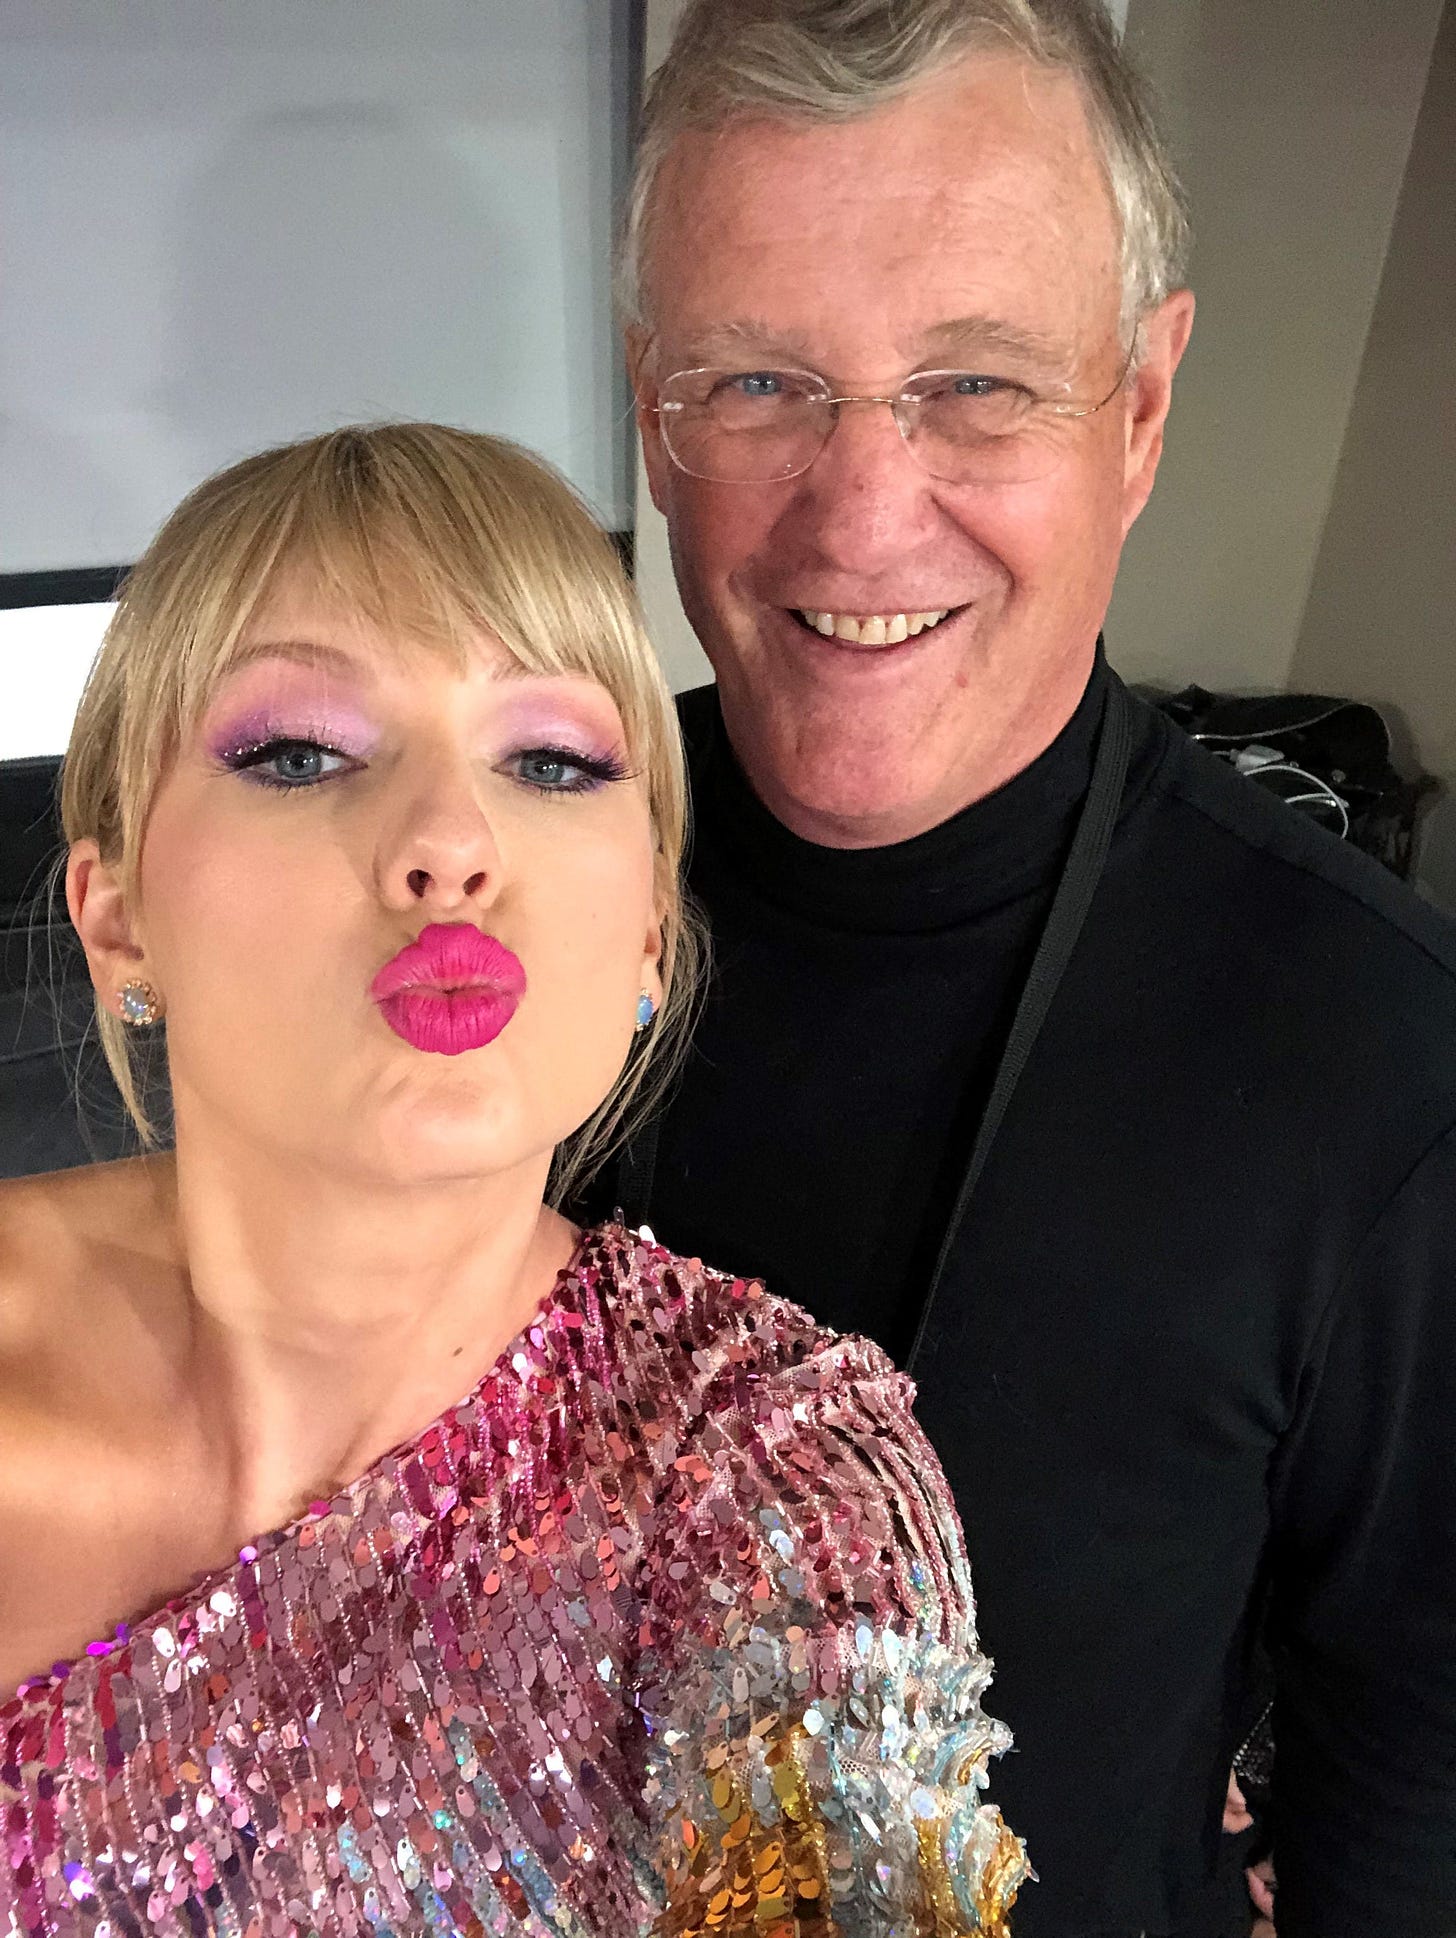 Taylor Swift's dad fought off burglar who broke into Florida home